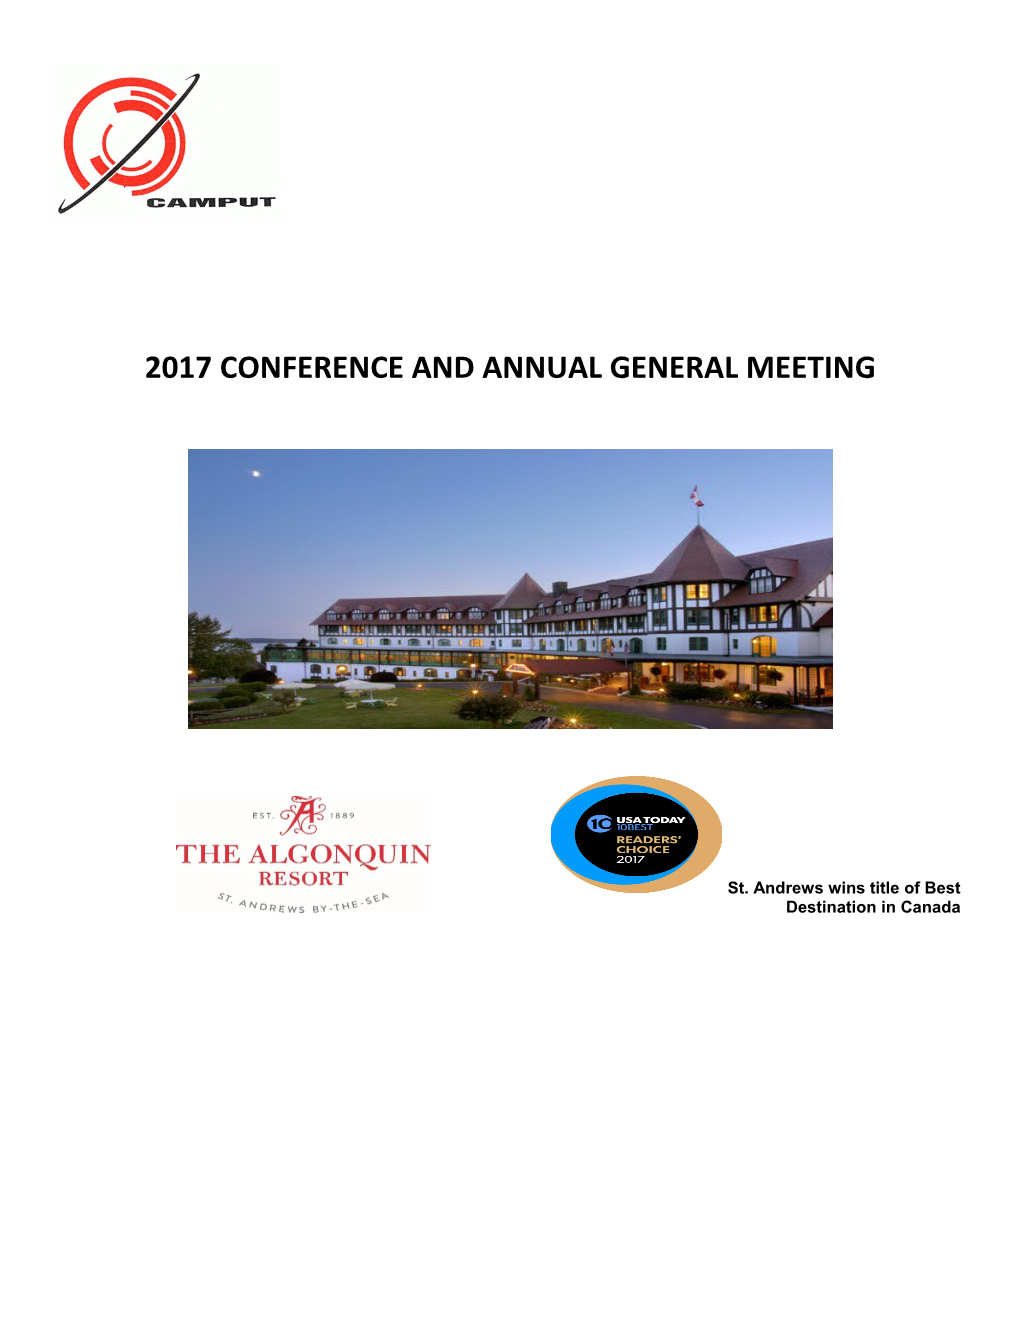 2017 Conference and Annual General Meeting